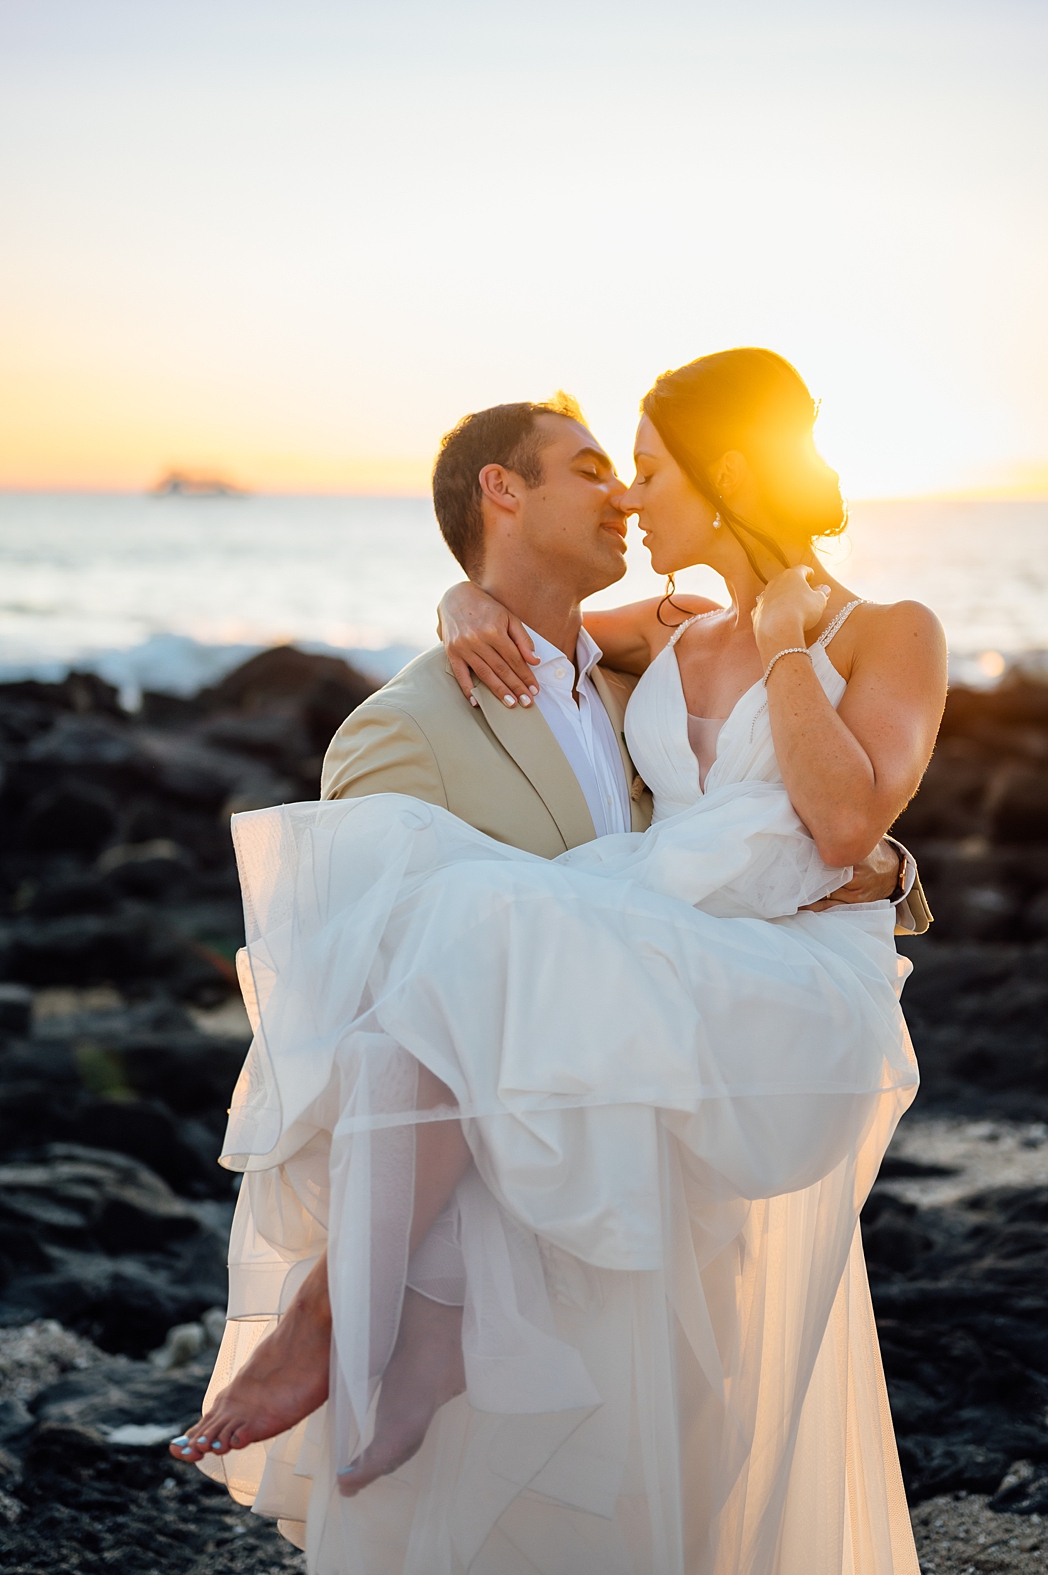 sweet photo of the bride and groom by the Big Island beach